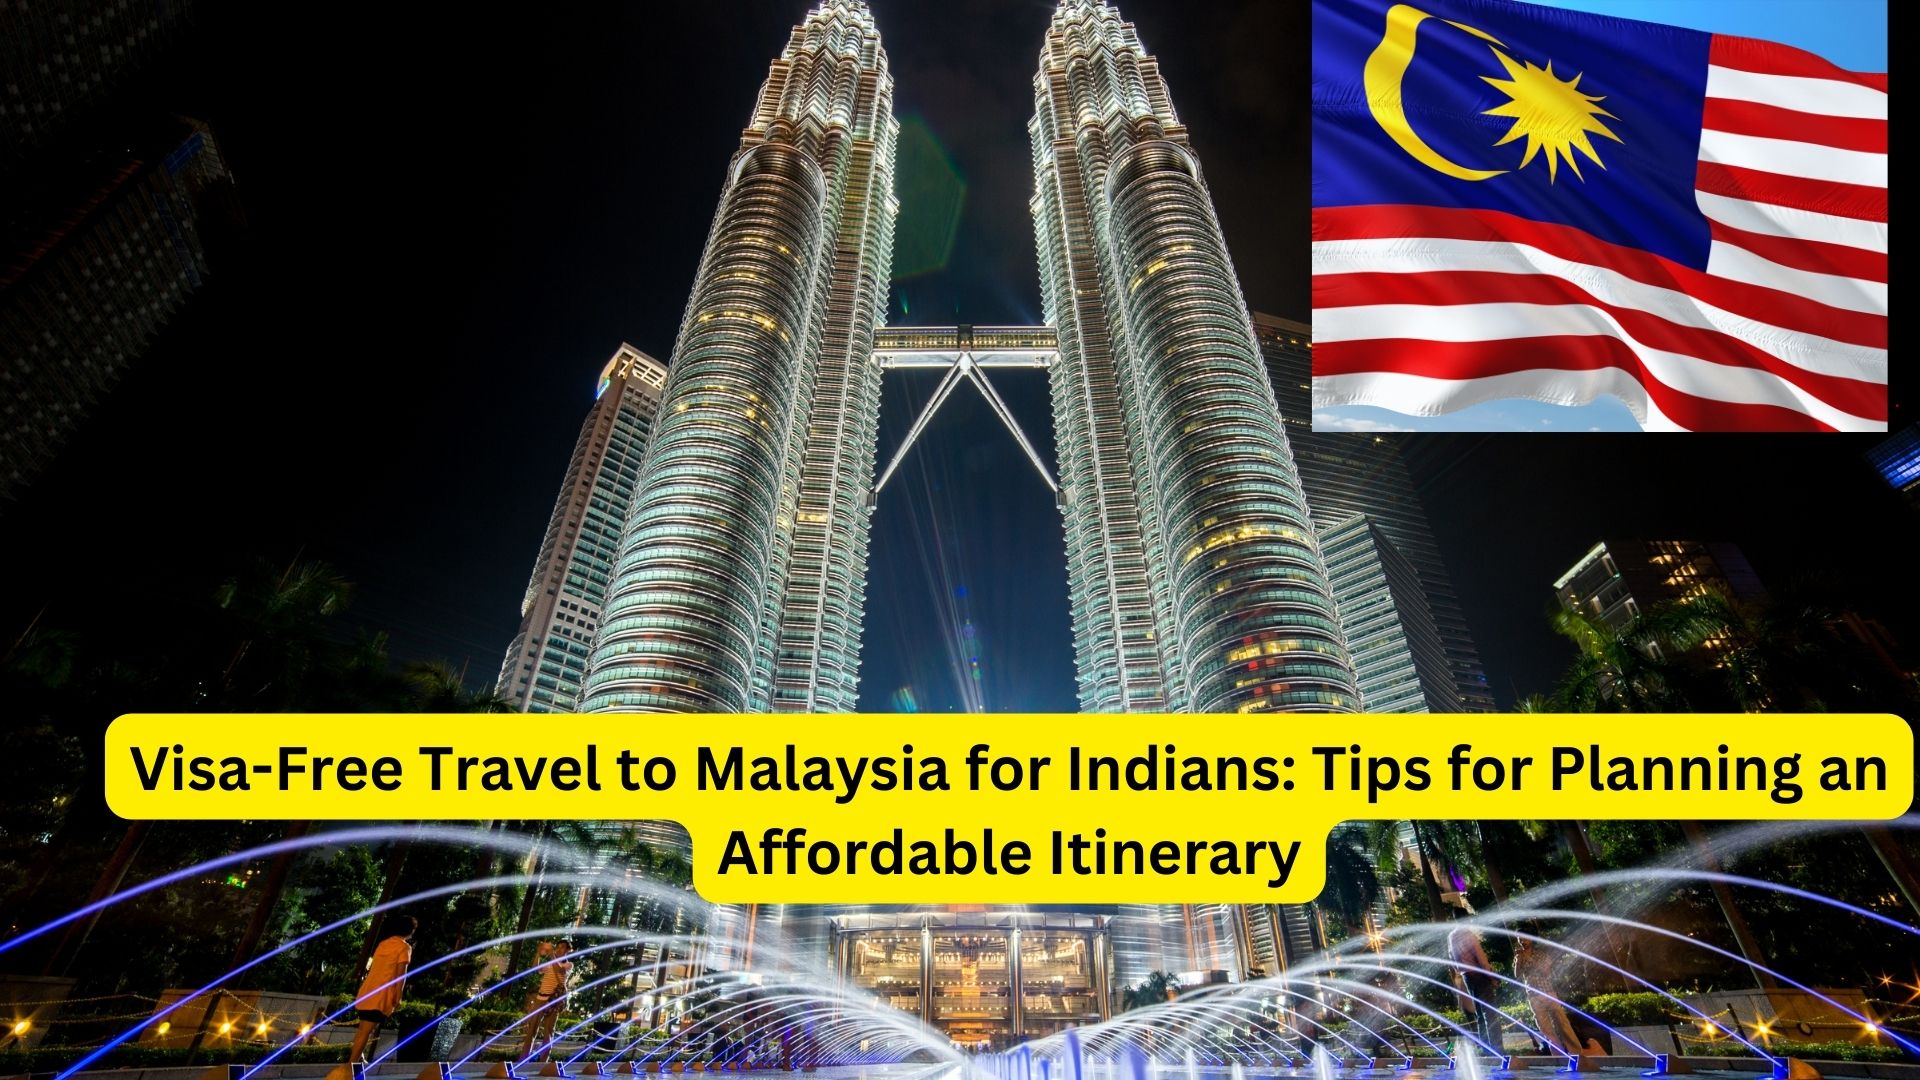 Visa-Free Travel to Malaysia for Indians: Tips for Planning an Affordable Itinerary